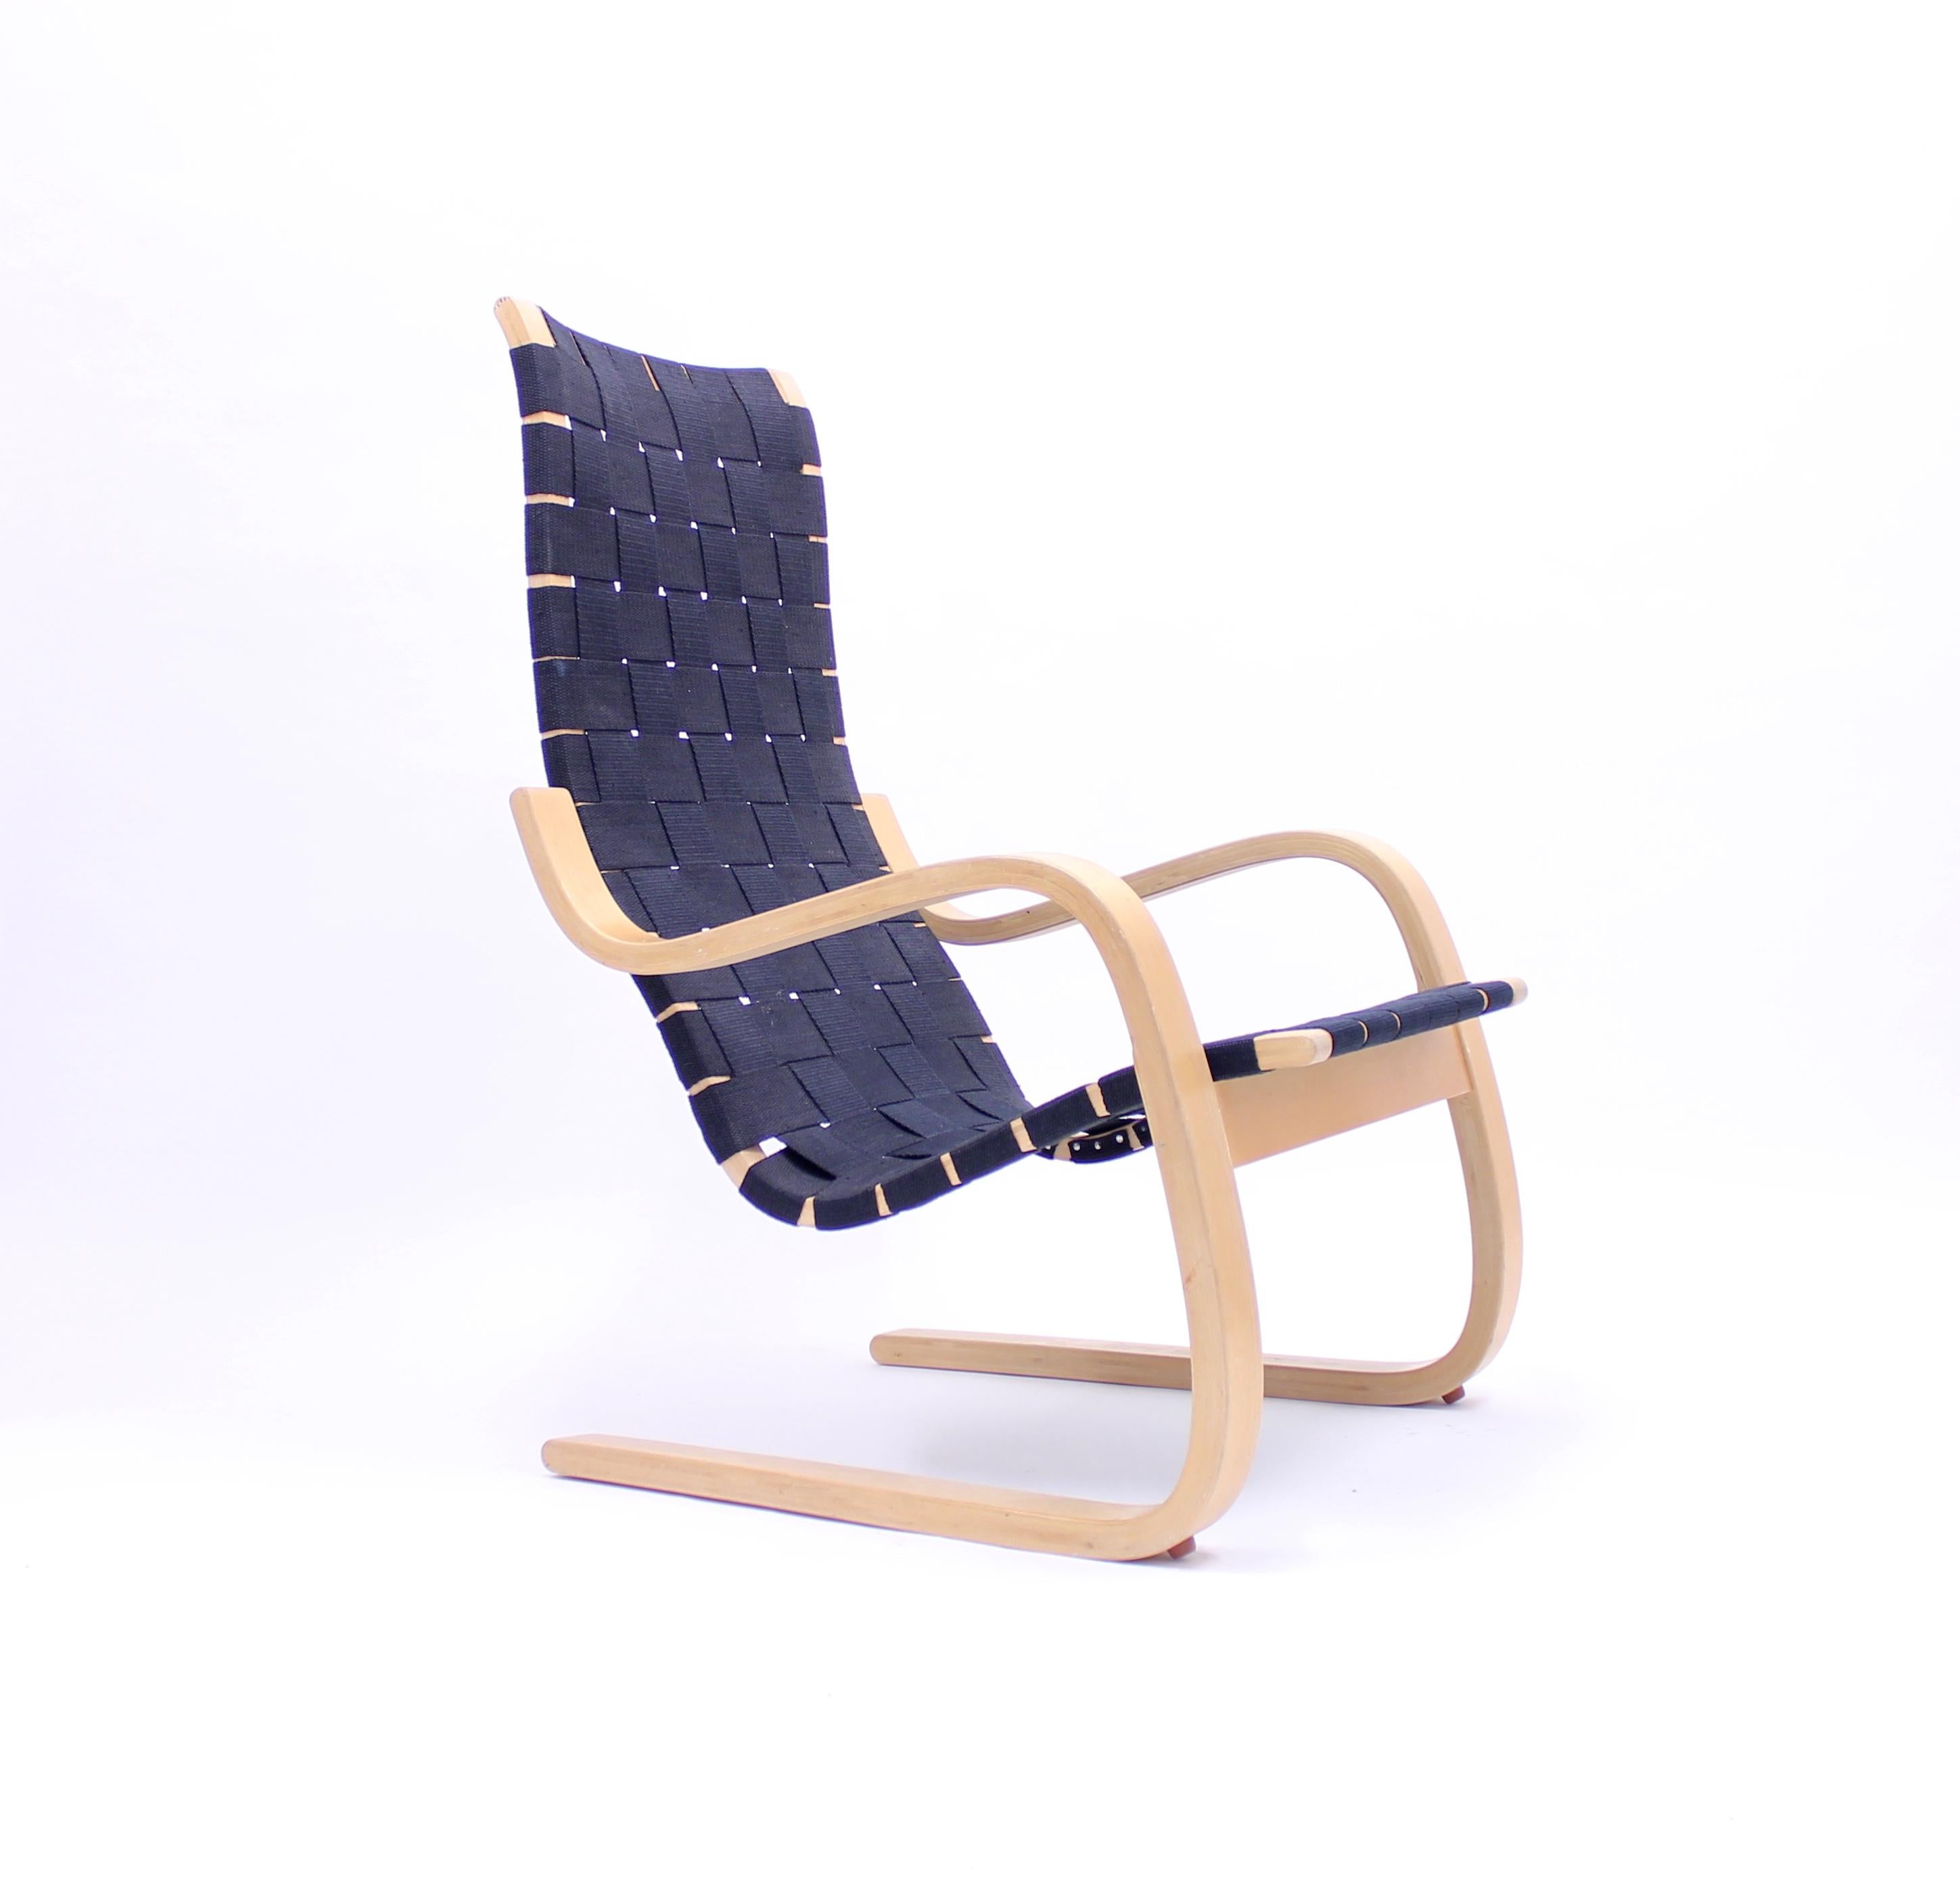 Early production, model 406 easy chair, by Alvar Aalto for Artek, Hedemora, circa 1950. Frame of steam bent birch and later upholstery in hemp webbing commissioned by the original owner. It has a very special provenance. This single owner example